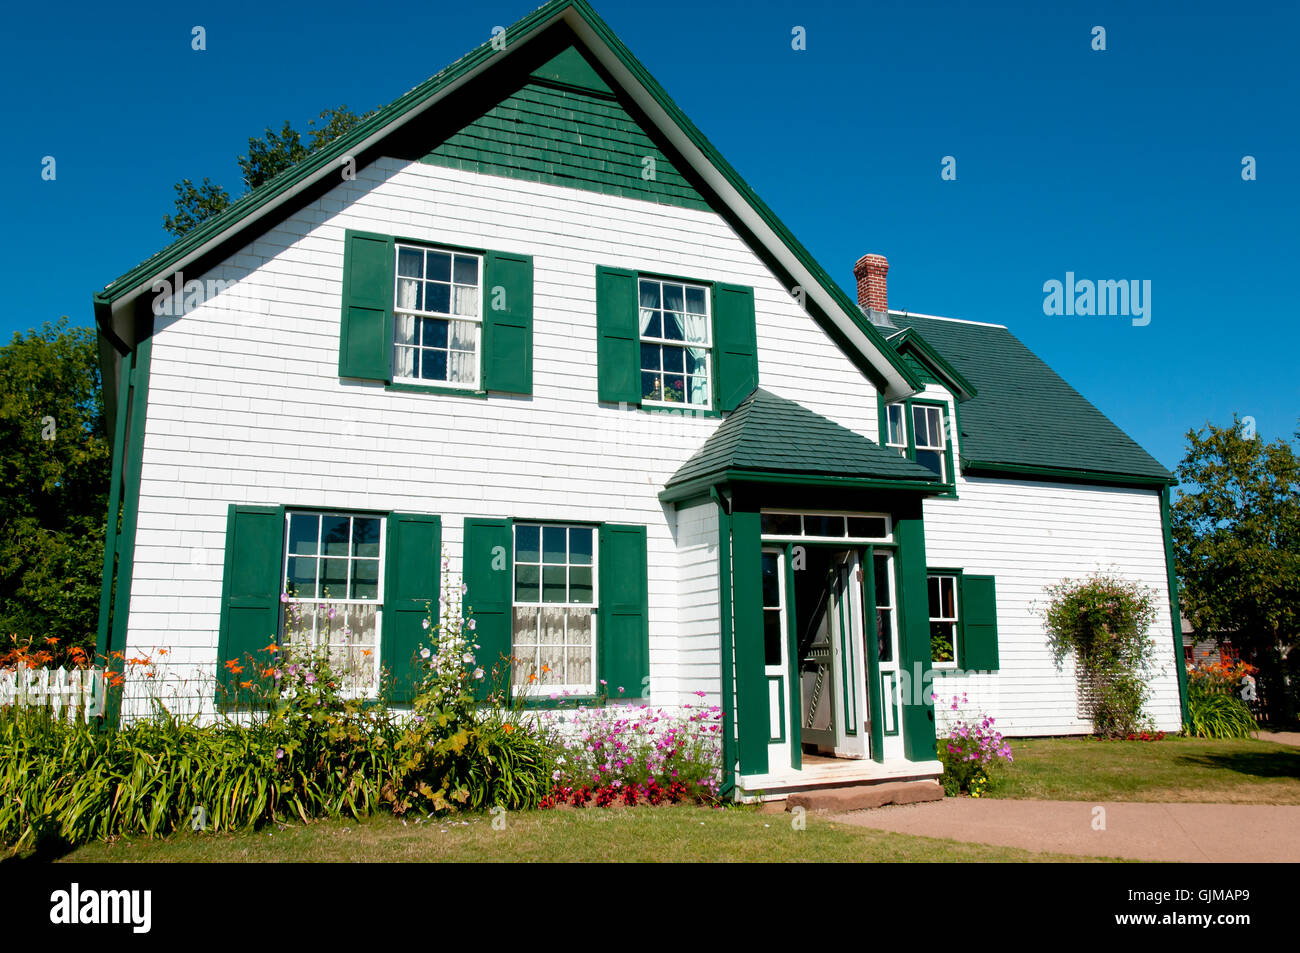 Anne of Green Gables - Prince Edward Island - Canada Banque D'Images